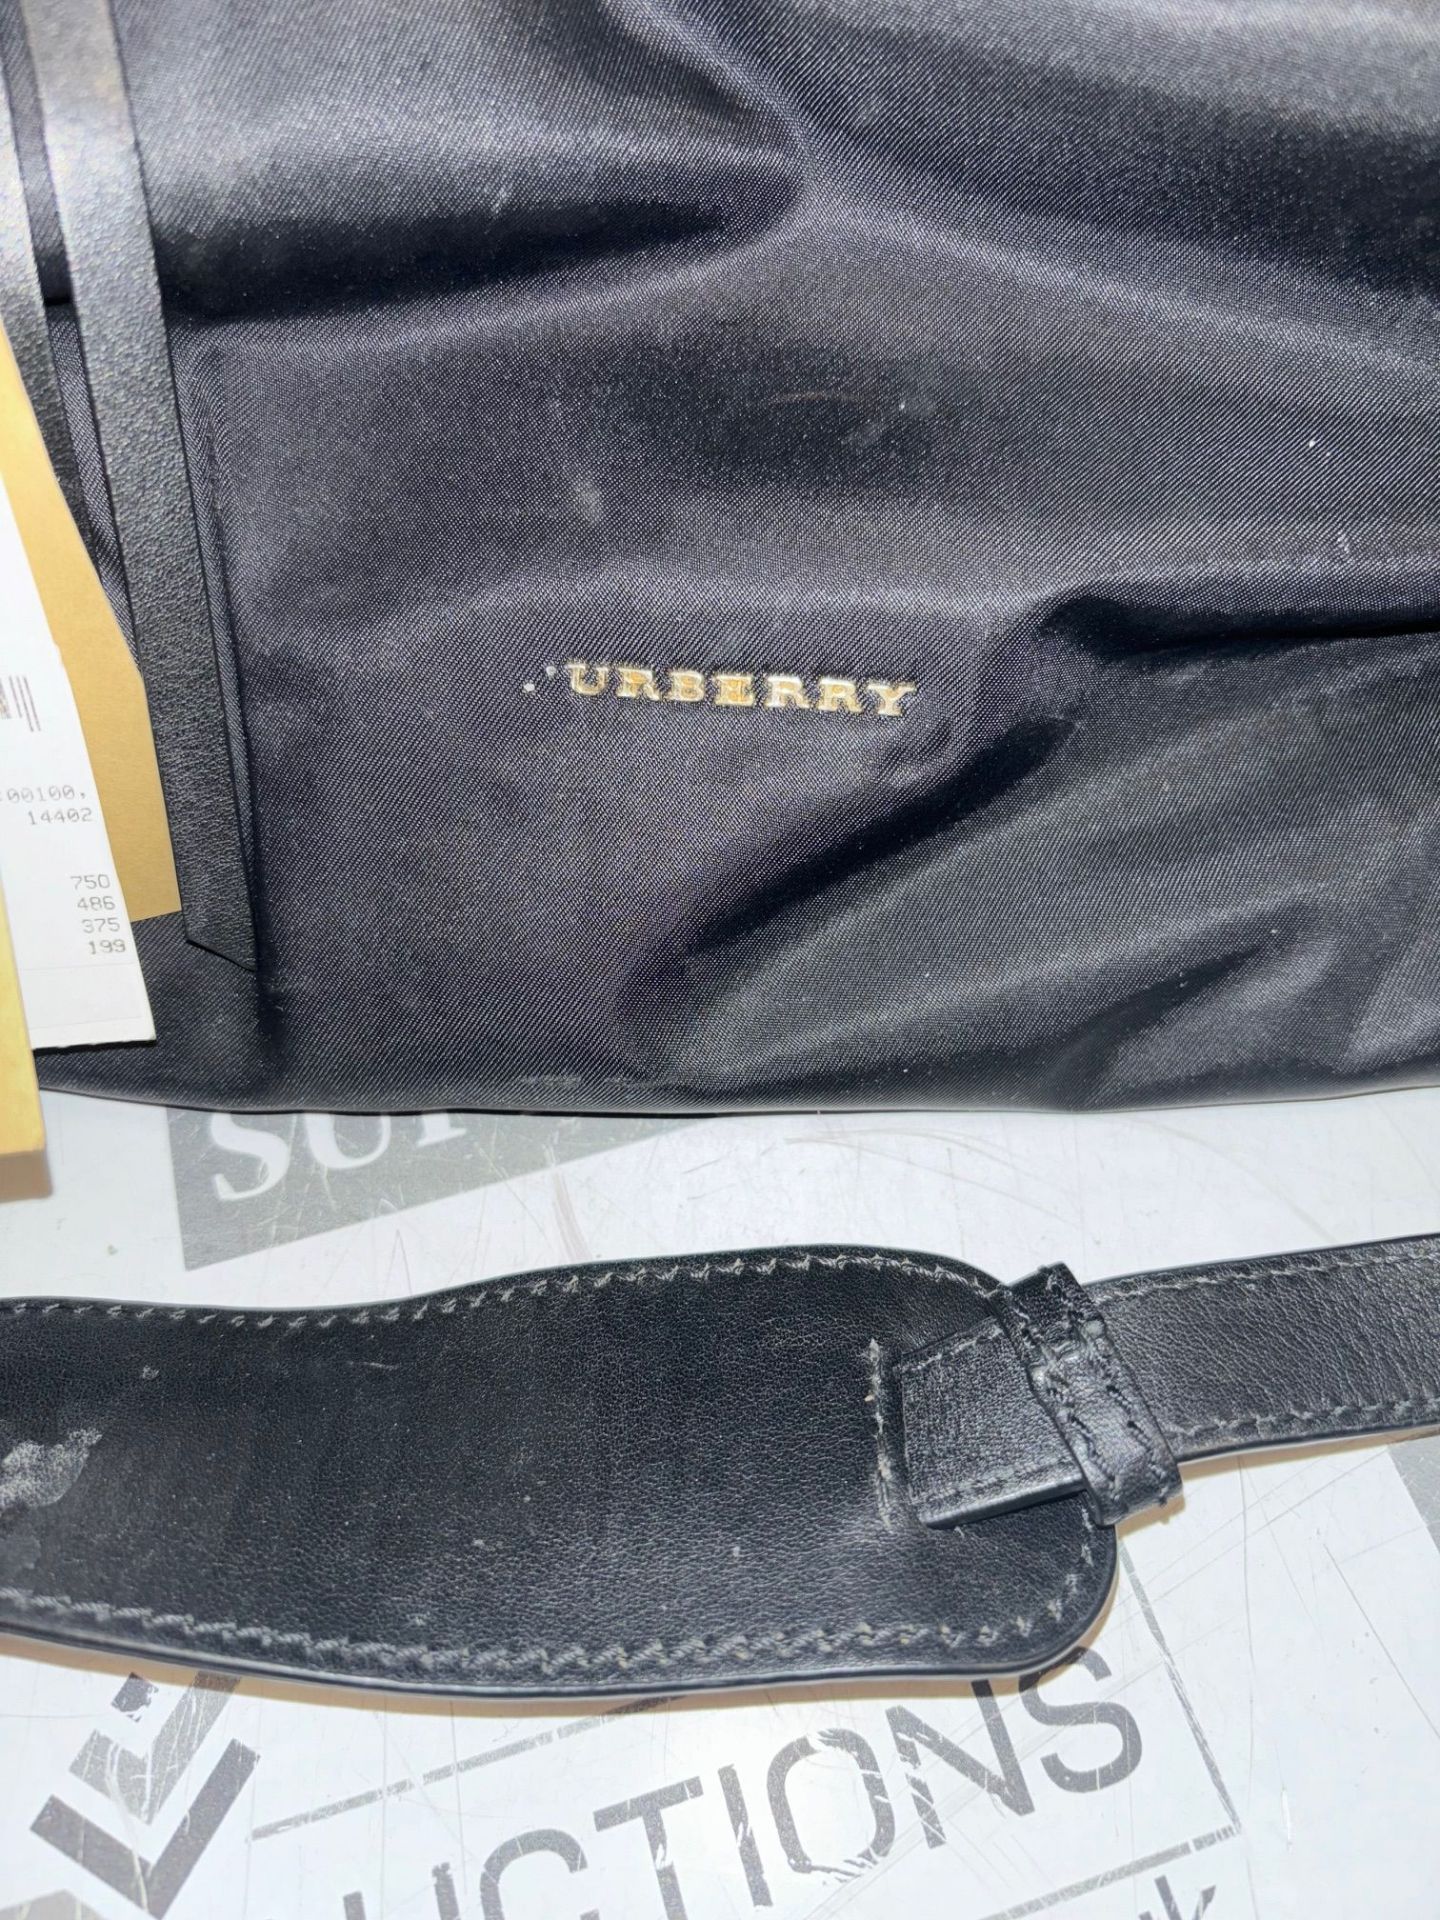 Genuine Burberry black nylon diaper tote, includes changing mat. 10/28 - Image 4 of 8